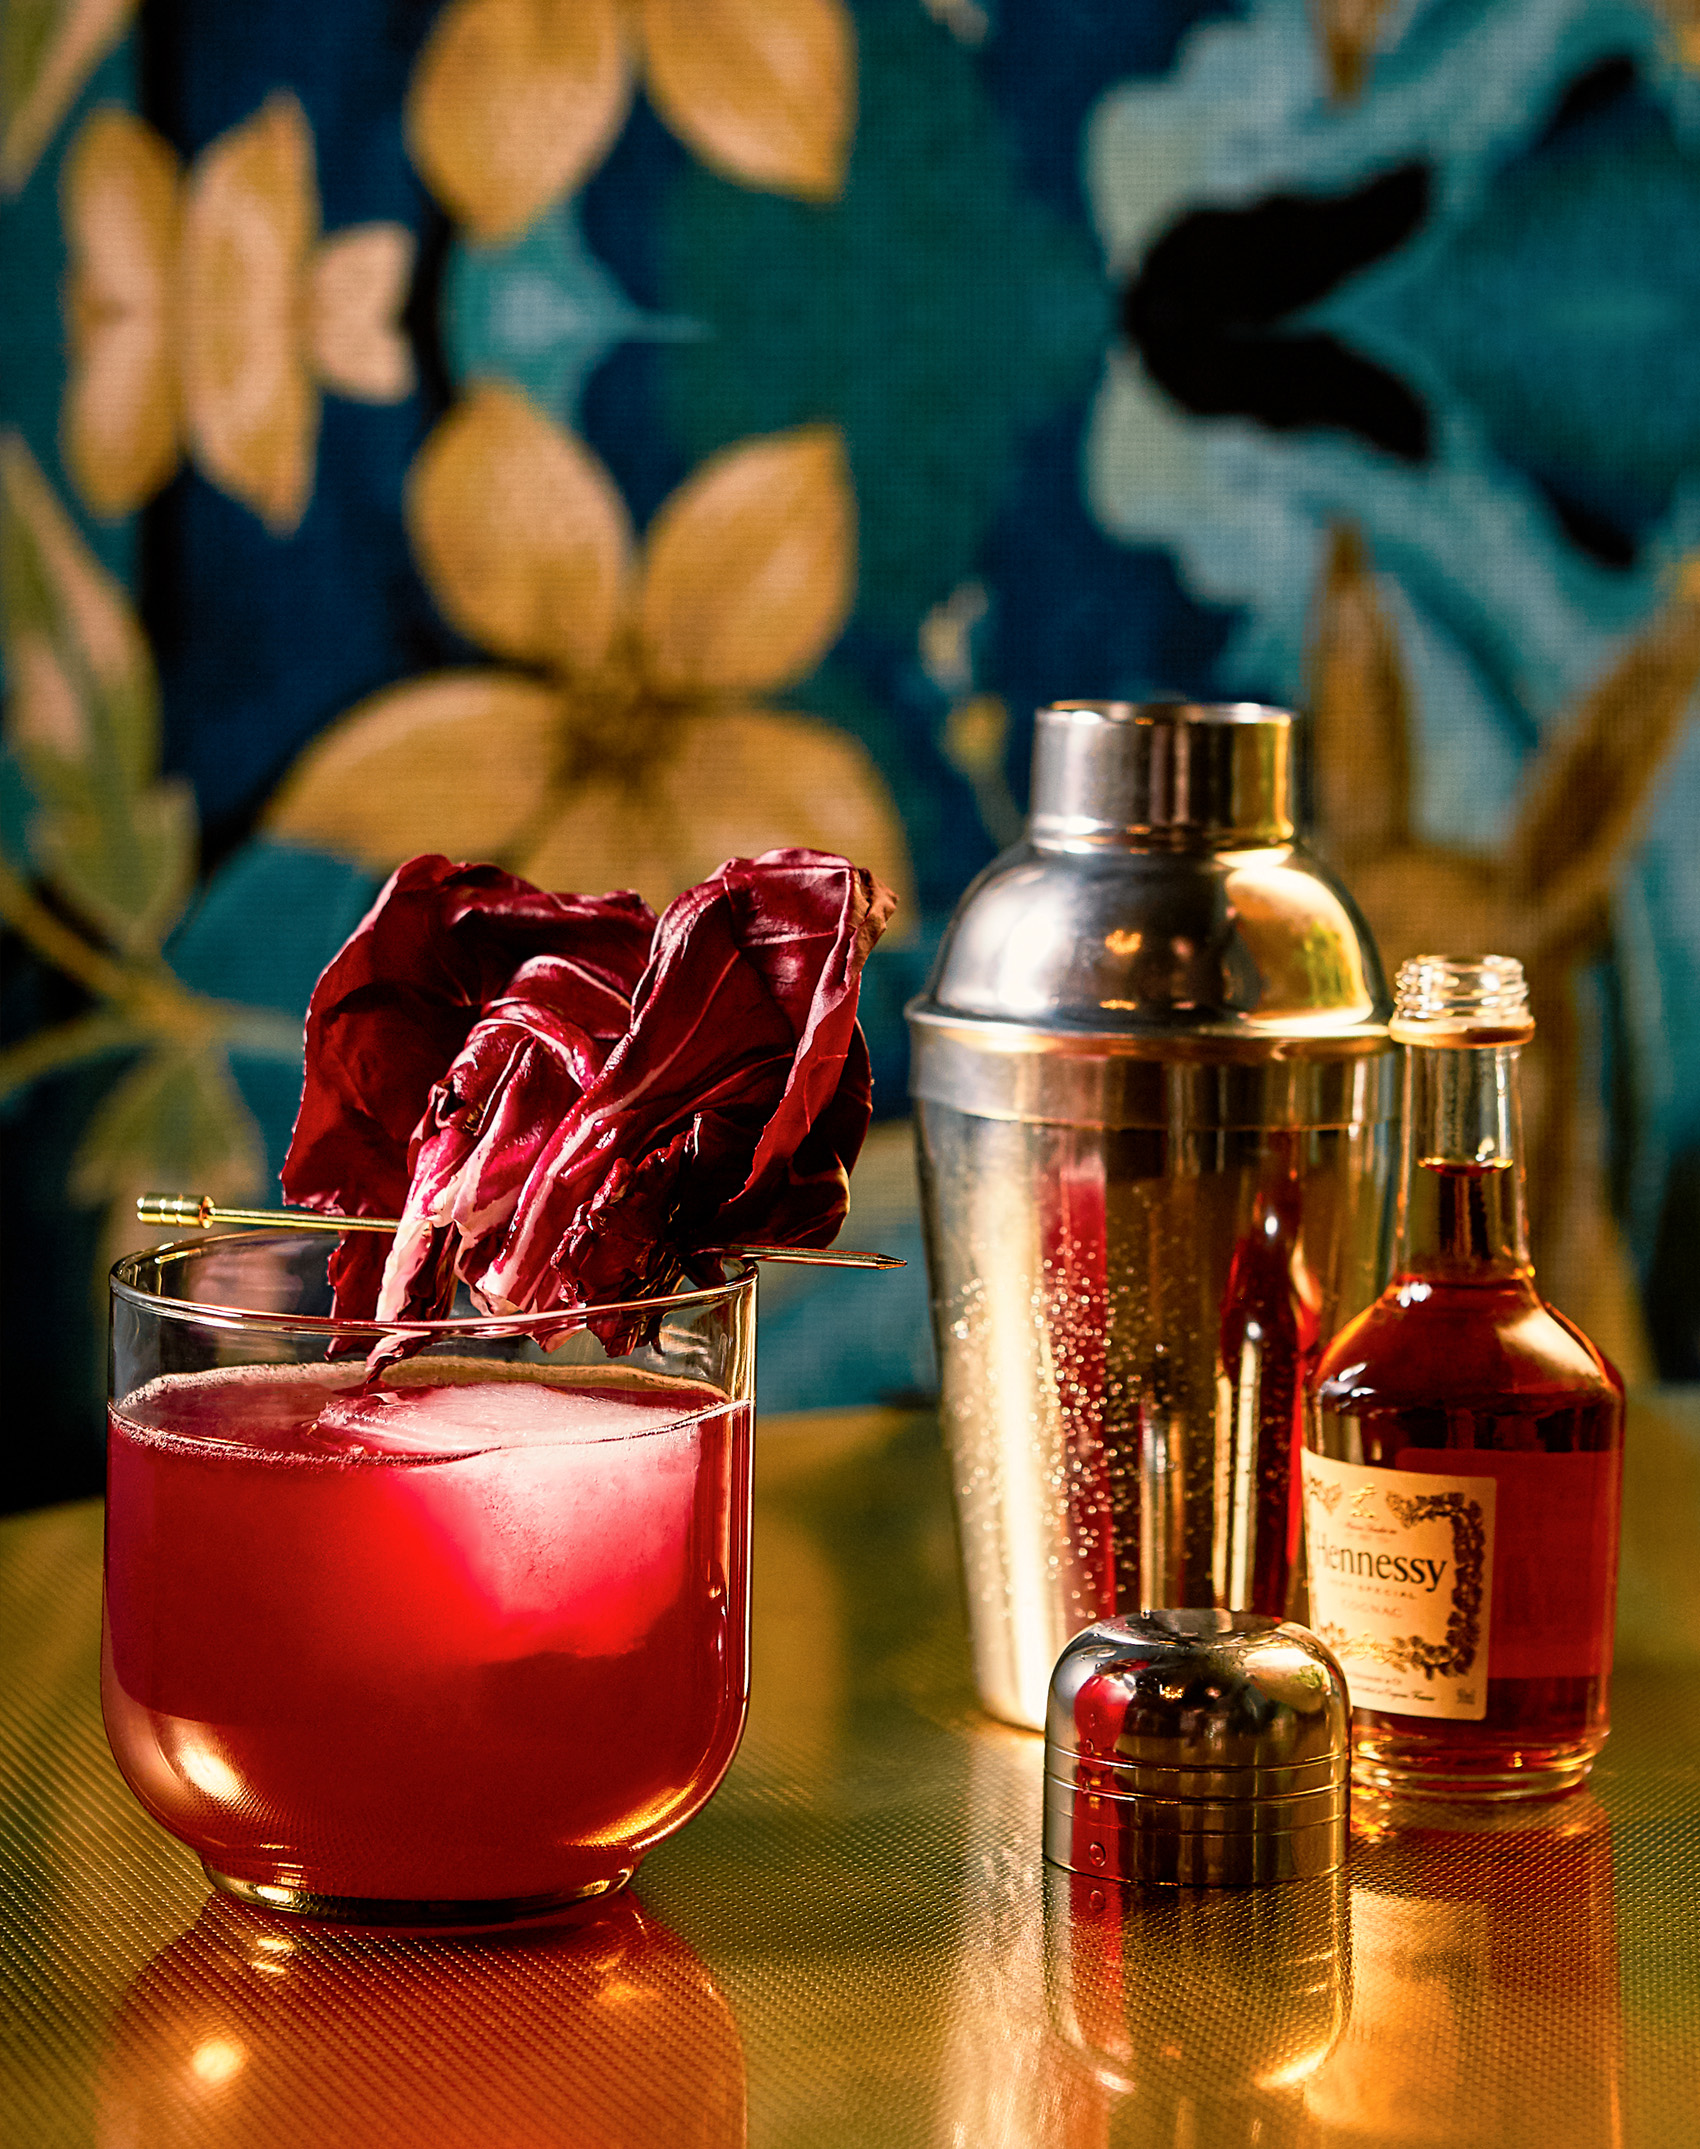 A red-hued cocktail in a stemless glass and garnished with pink flower petals. The glass sits on a dark wooden bar with mixers beside it, and floral wallpaper is visible in the background.